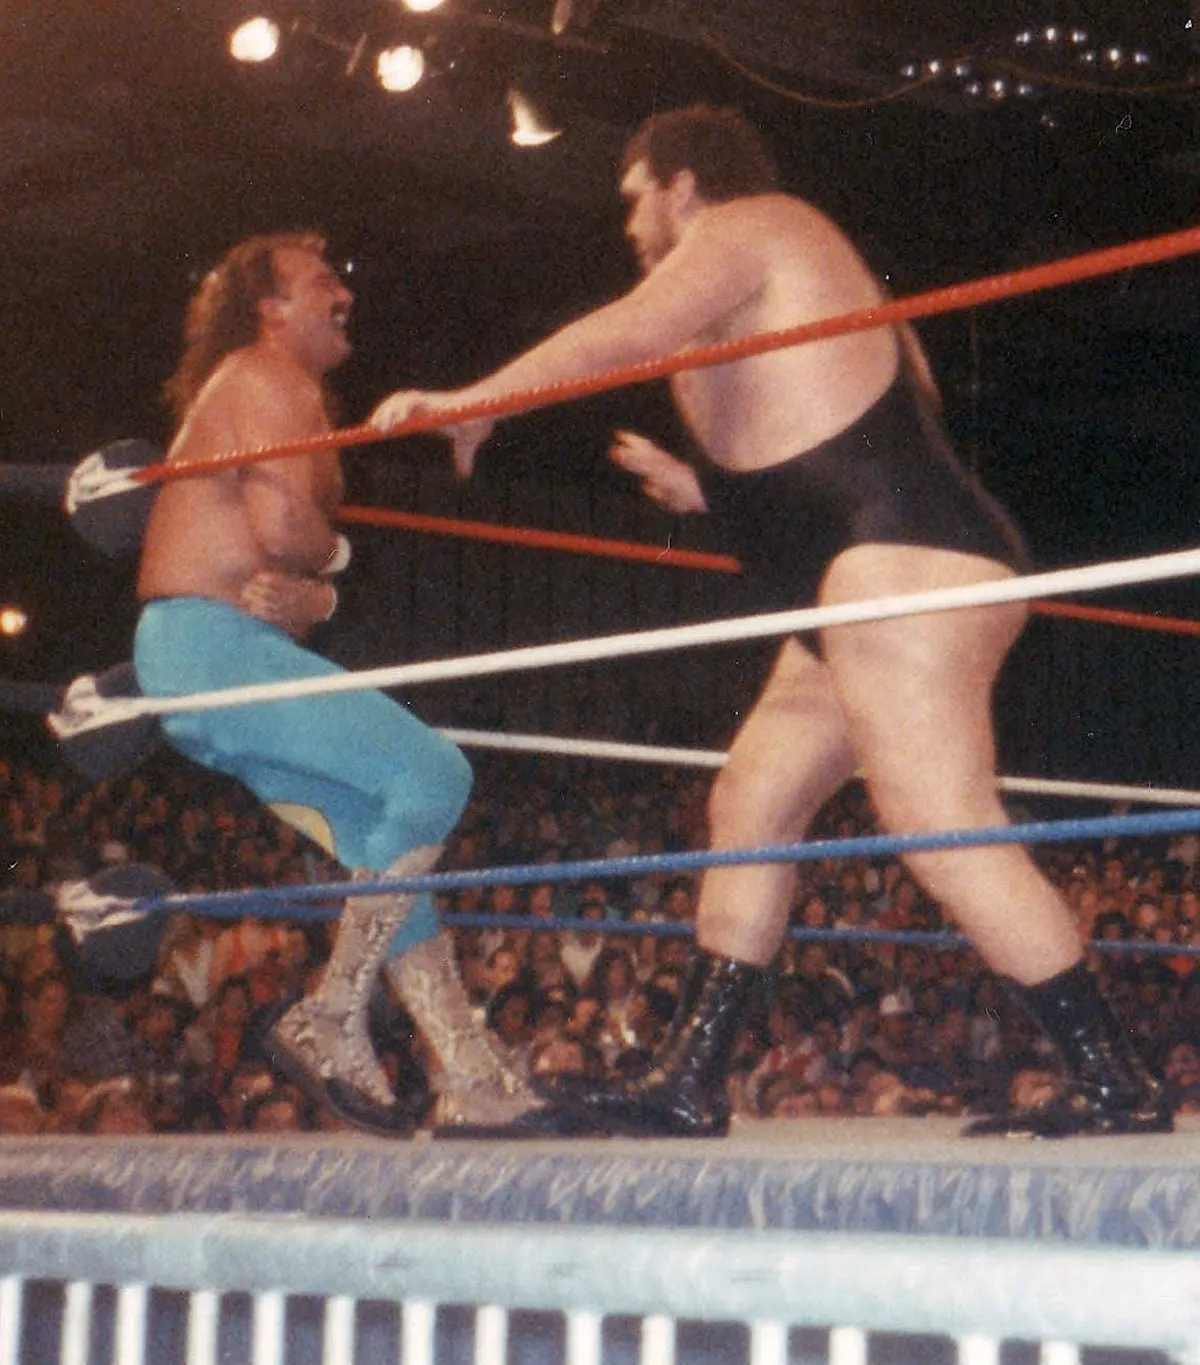 andre the giant photos